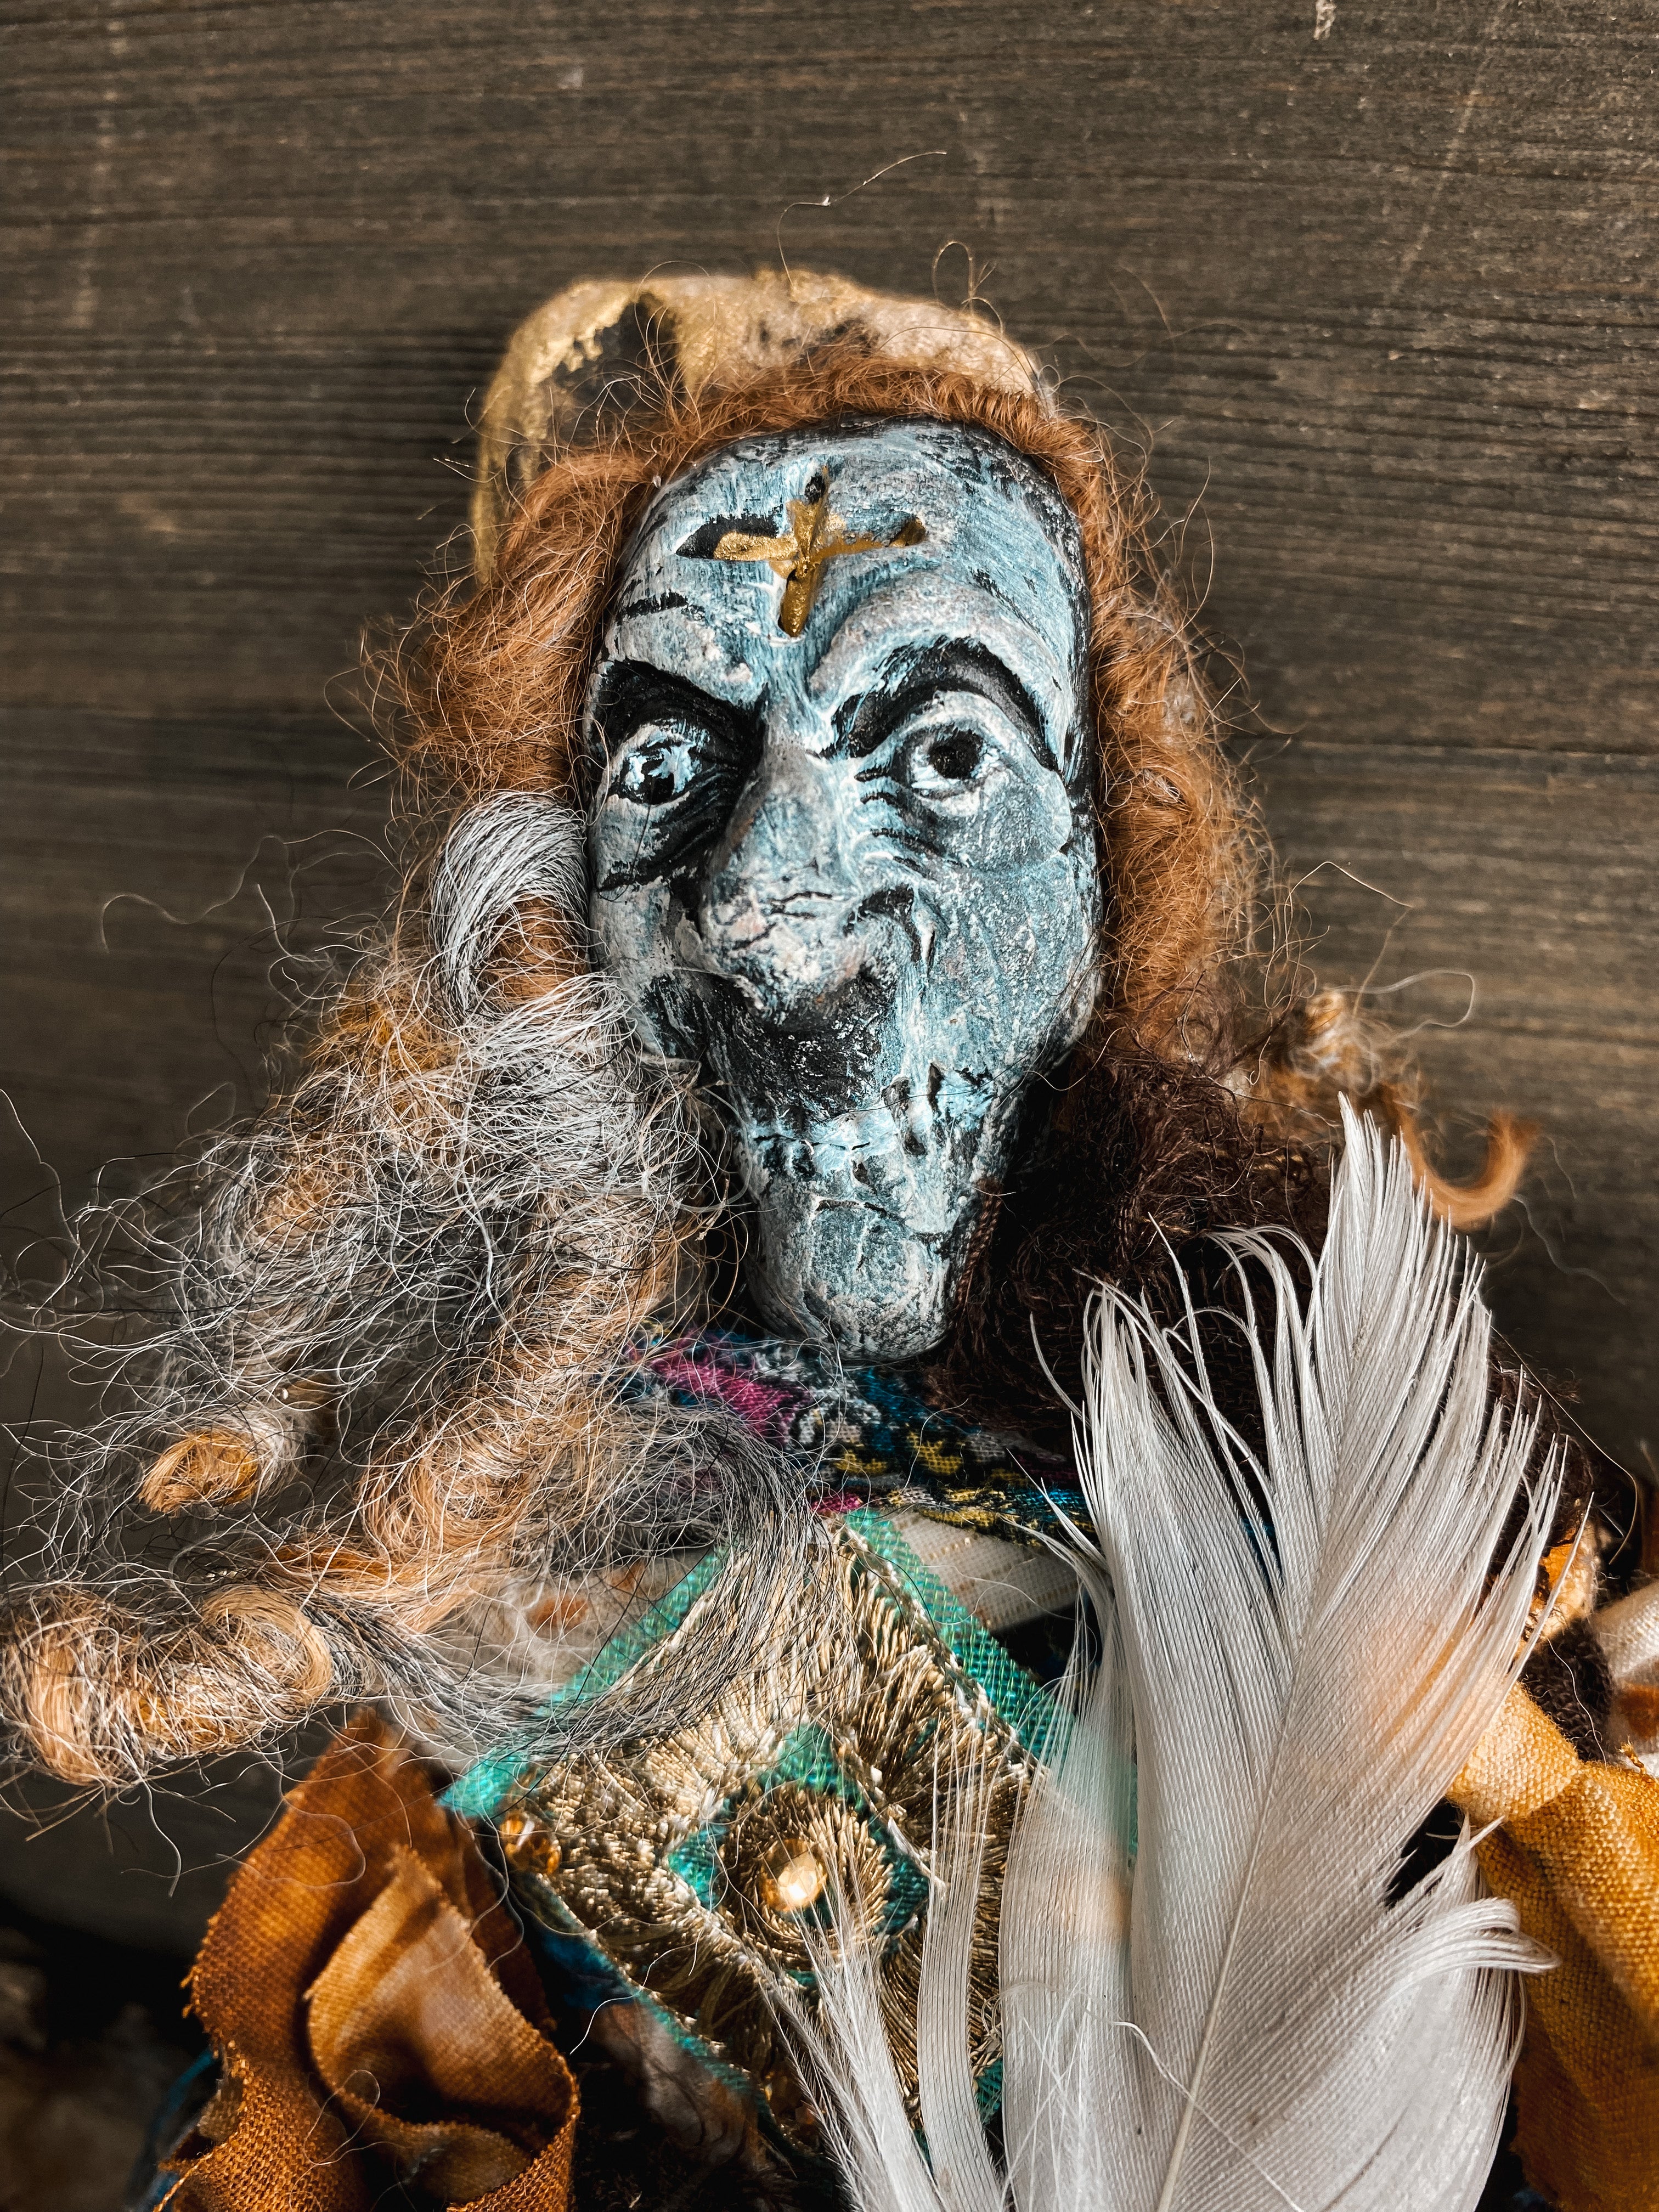 She of Independence - Sacred Medicine Doll for Liberation, Strength and Freedom